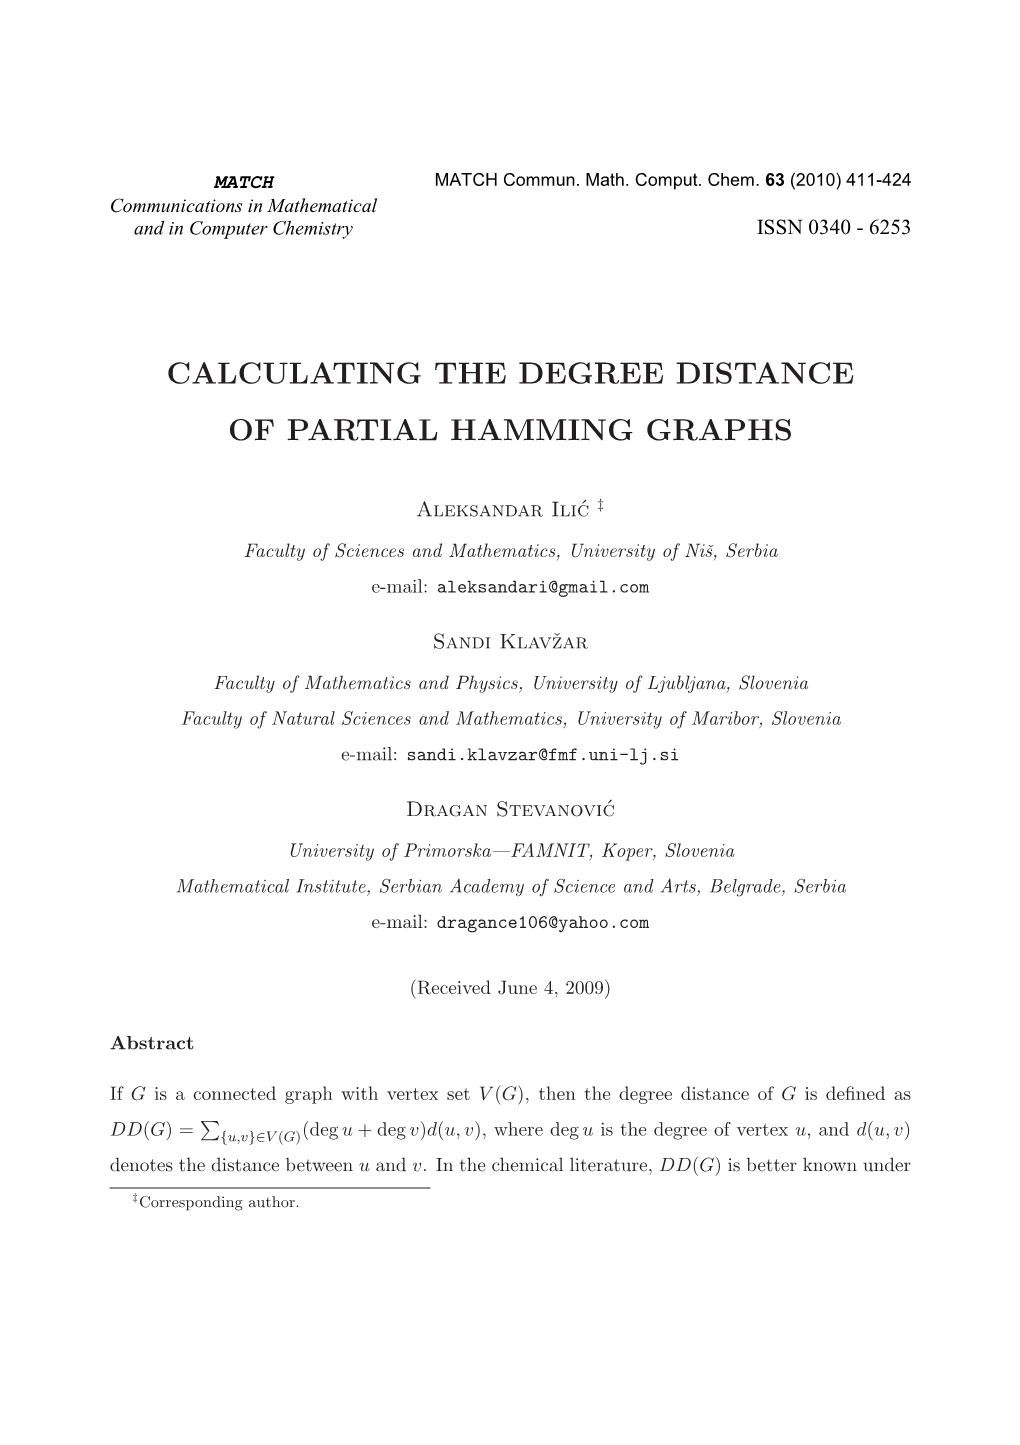 Calculating the Degree Distance of Partial Hamming Graphs